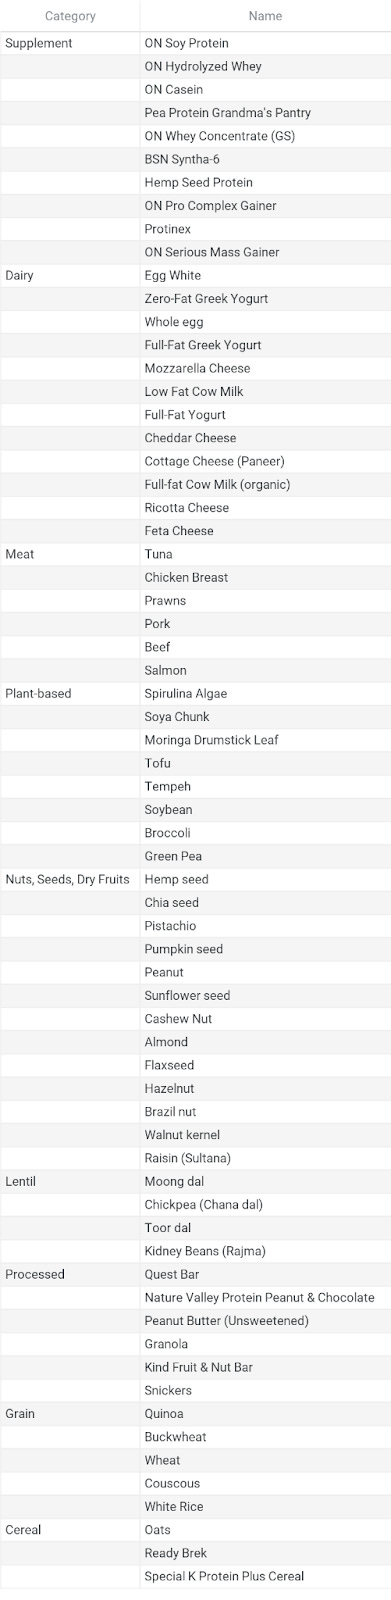 List showing ranking of food within each category